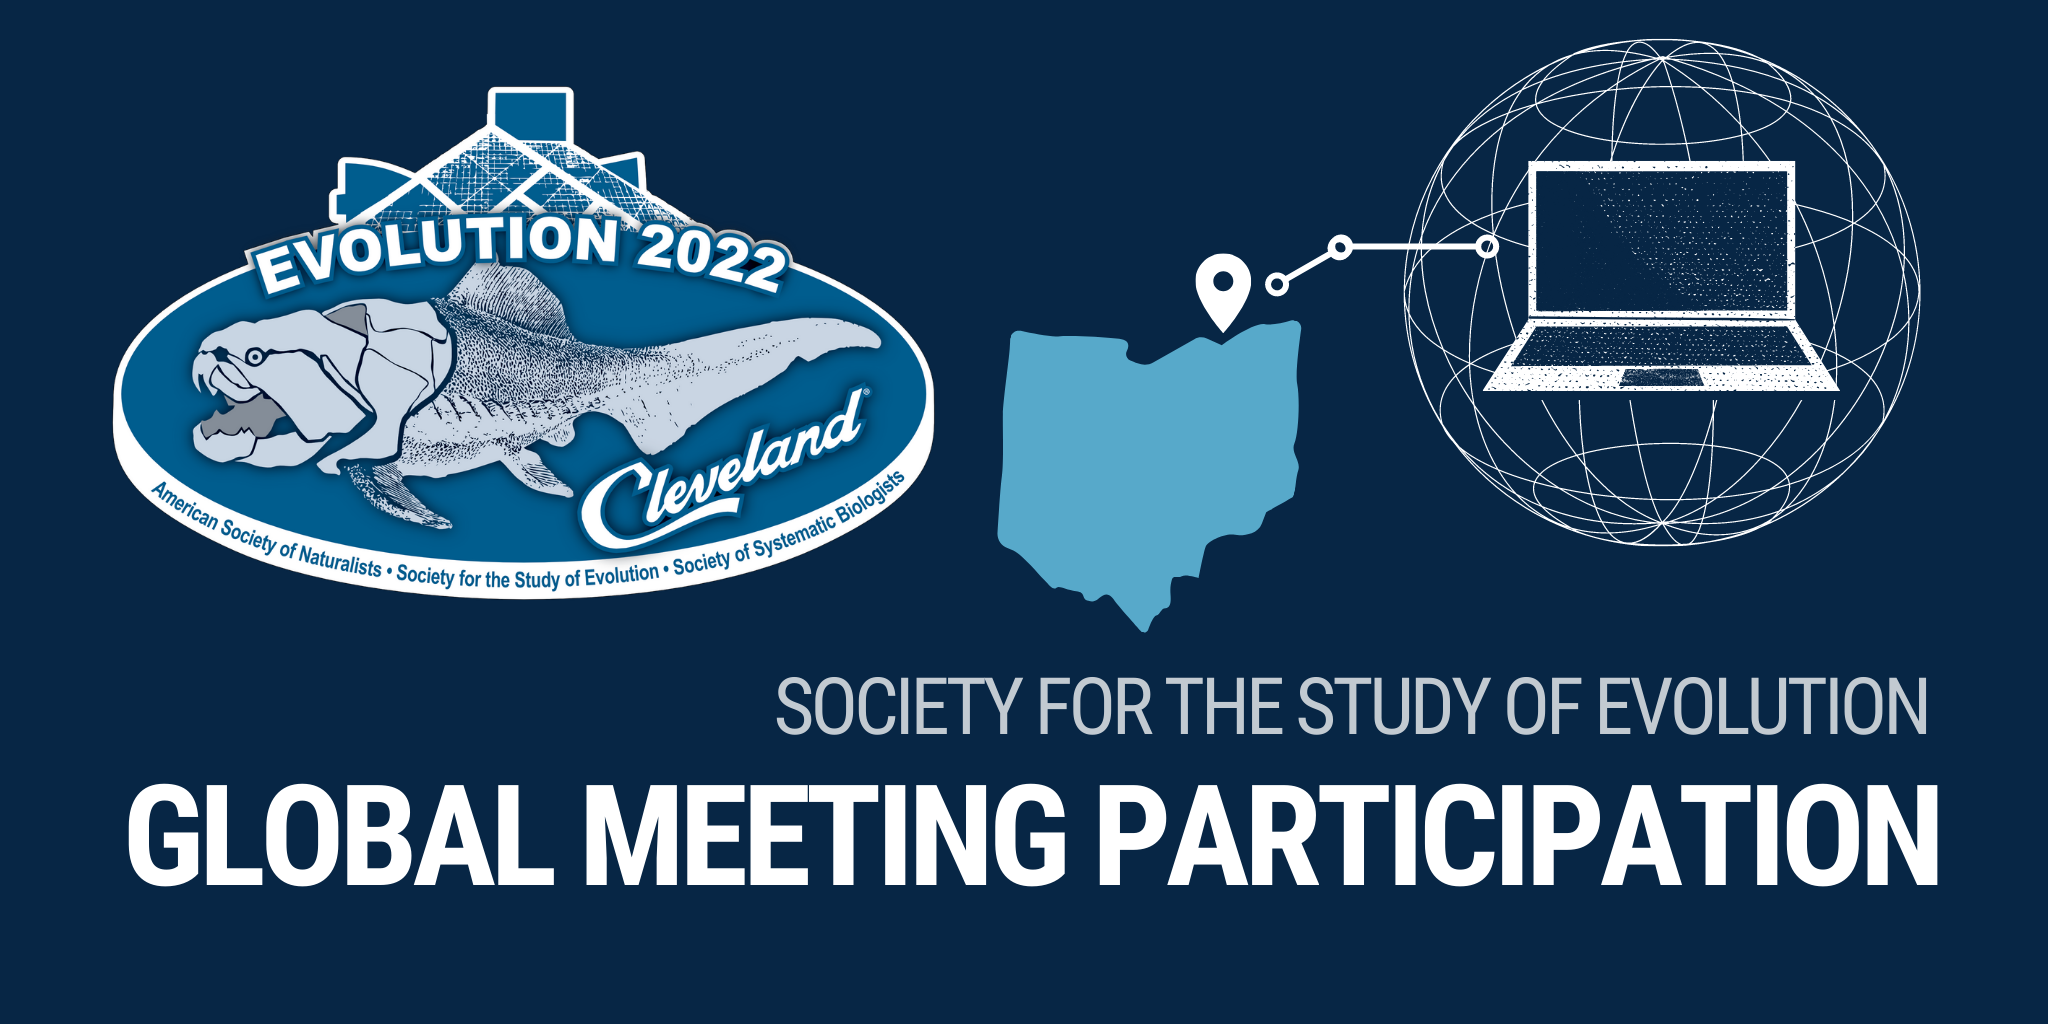 The Evolution 2022 meeting logo next to a laptop and globe outline connected with lines to a point on an outline of Ohio indicating Cleveland, with the words Society for the Study of Evolution Global Meeting Participation.